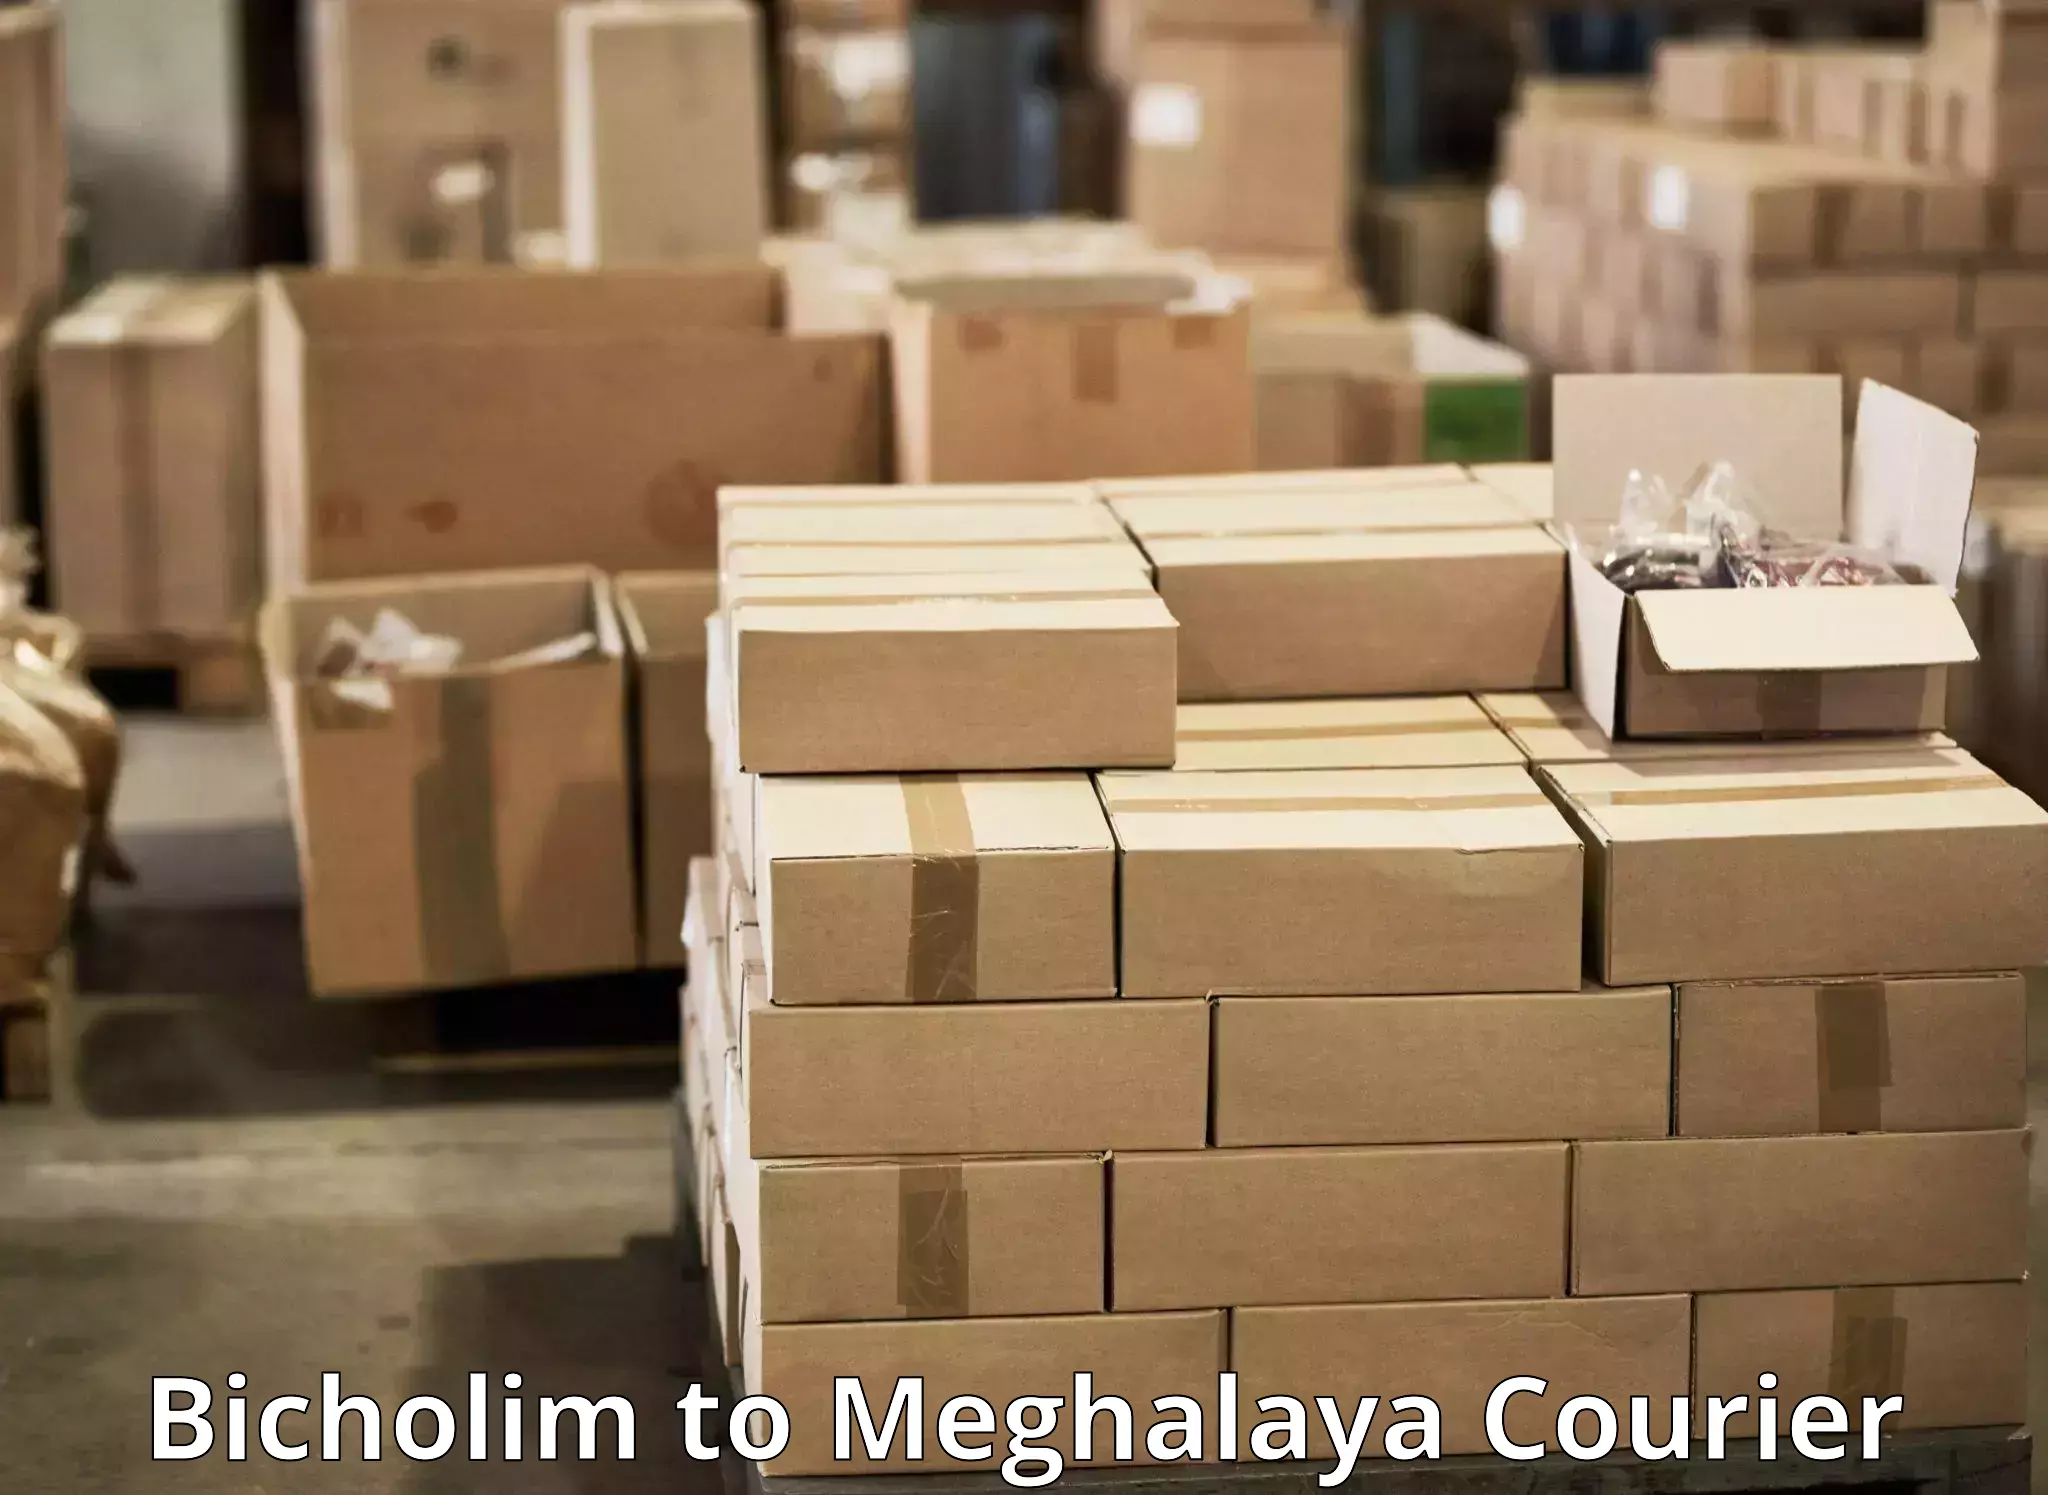 Easy access courier services Bicholim to Meghalaya